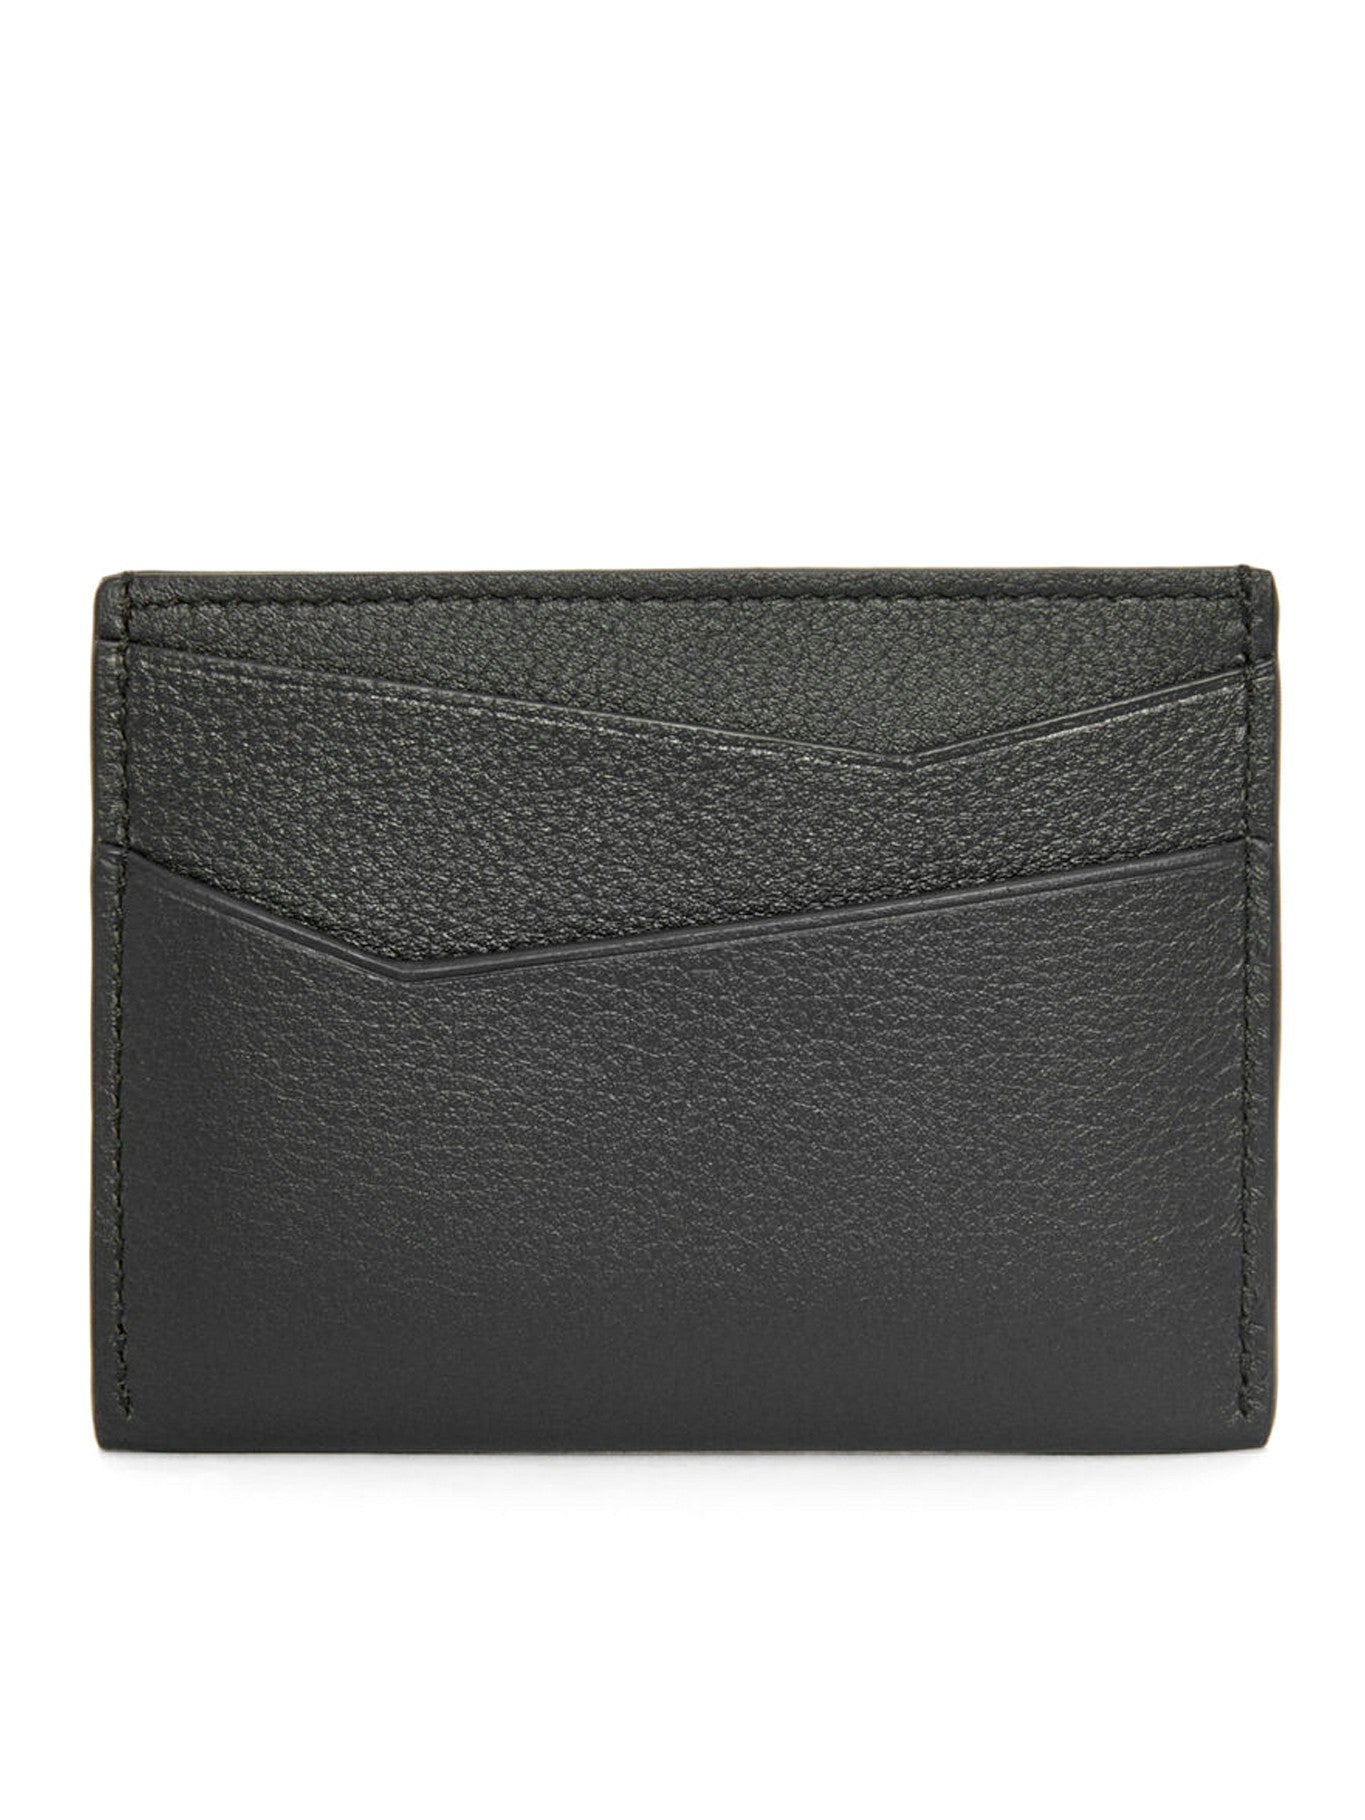 Simple Puzzle card holder in classic calfskin